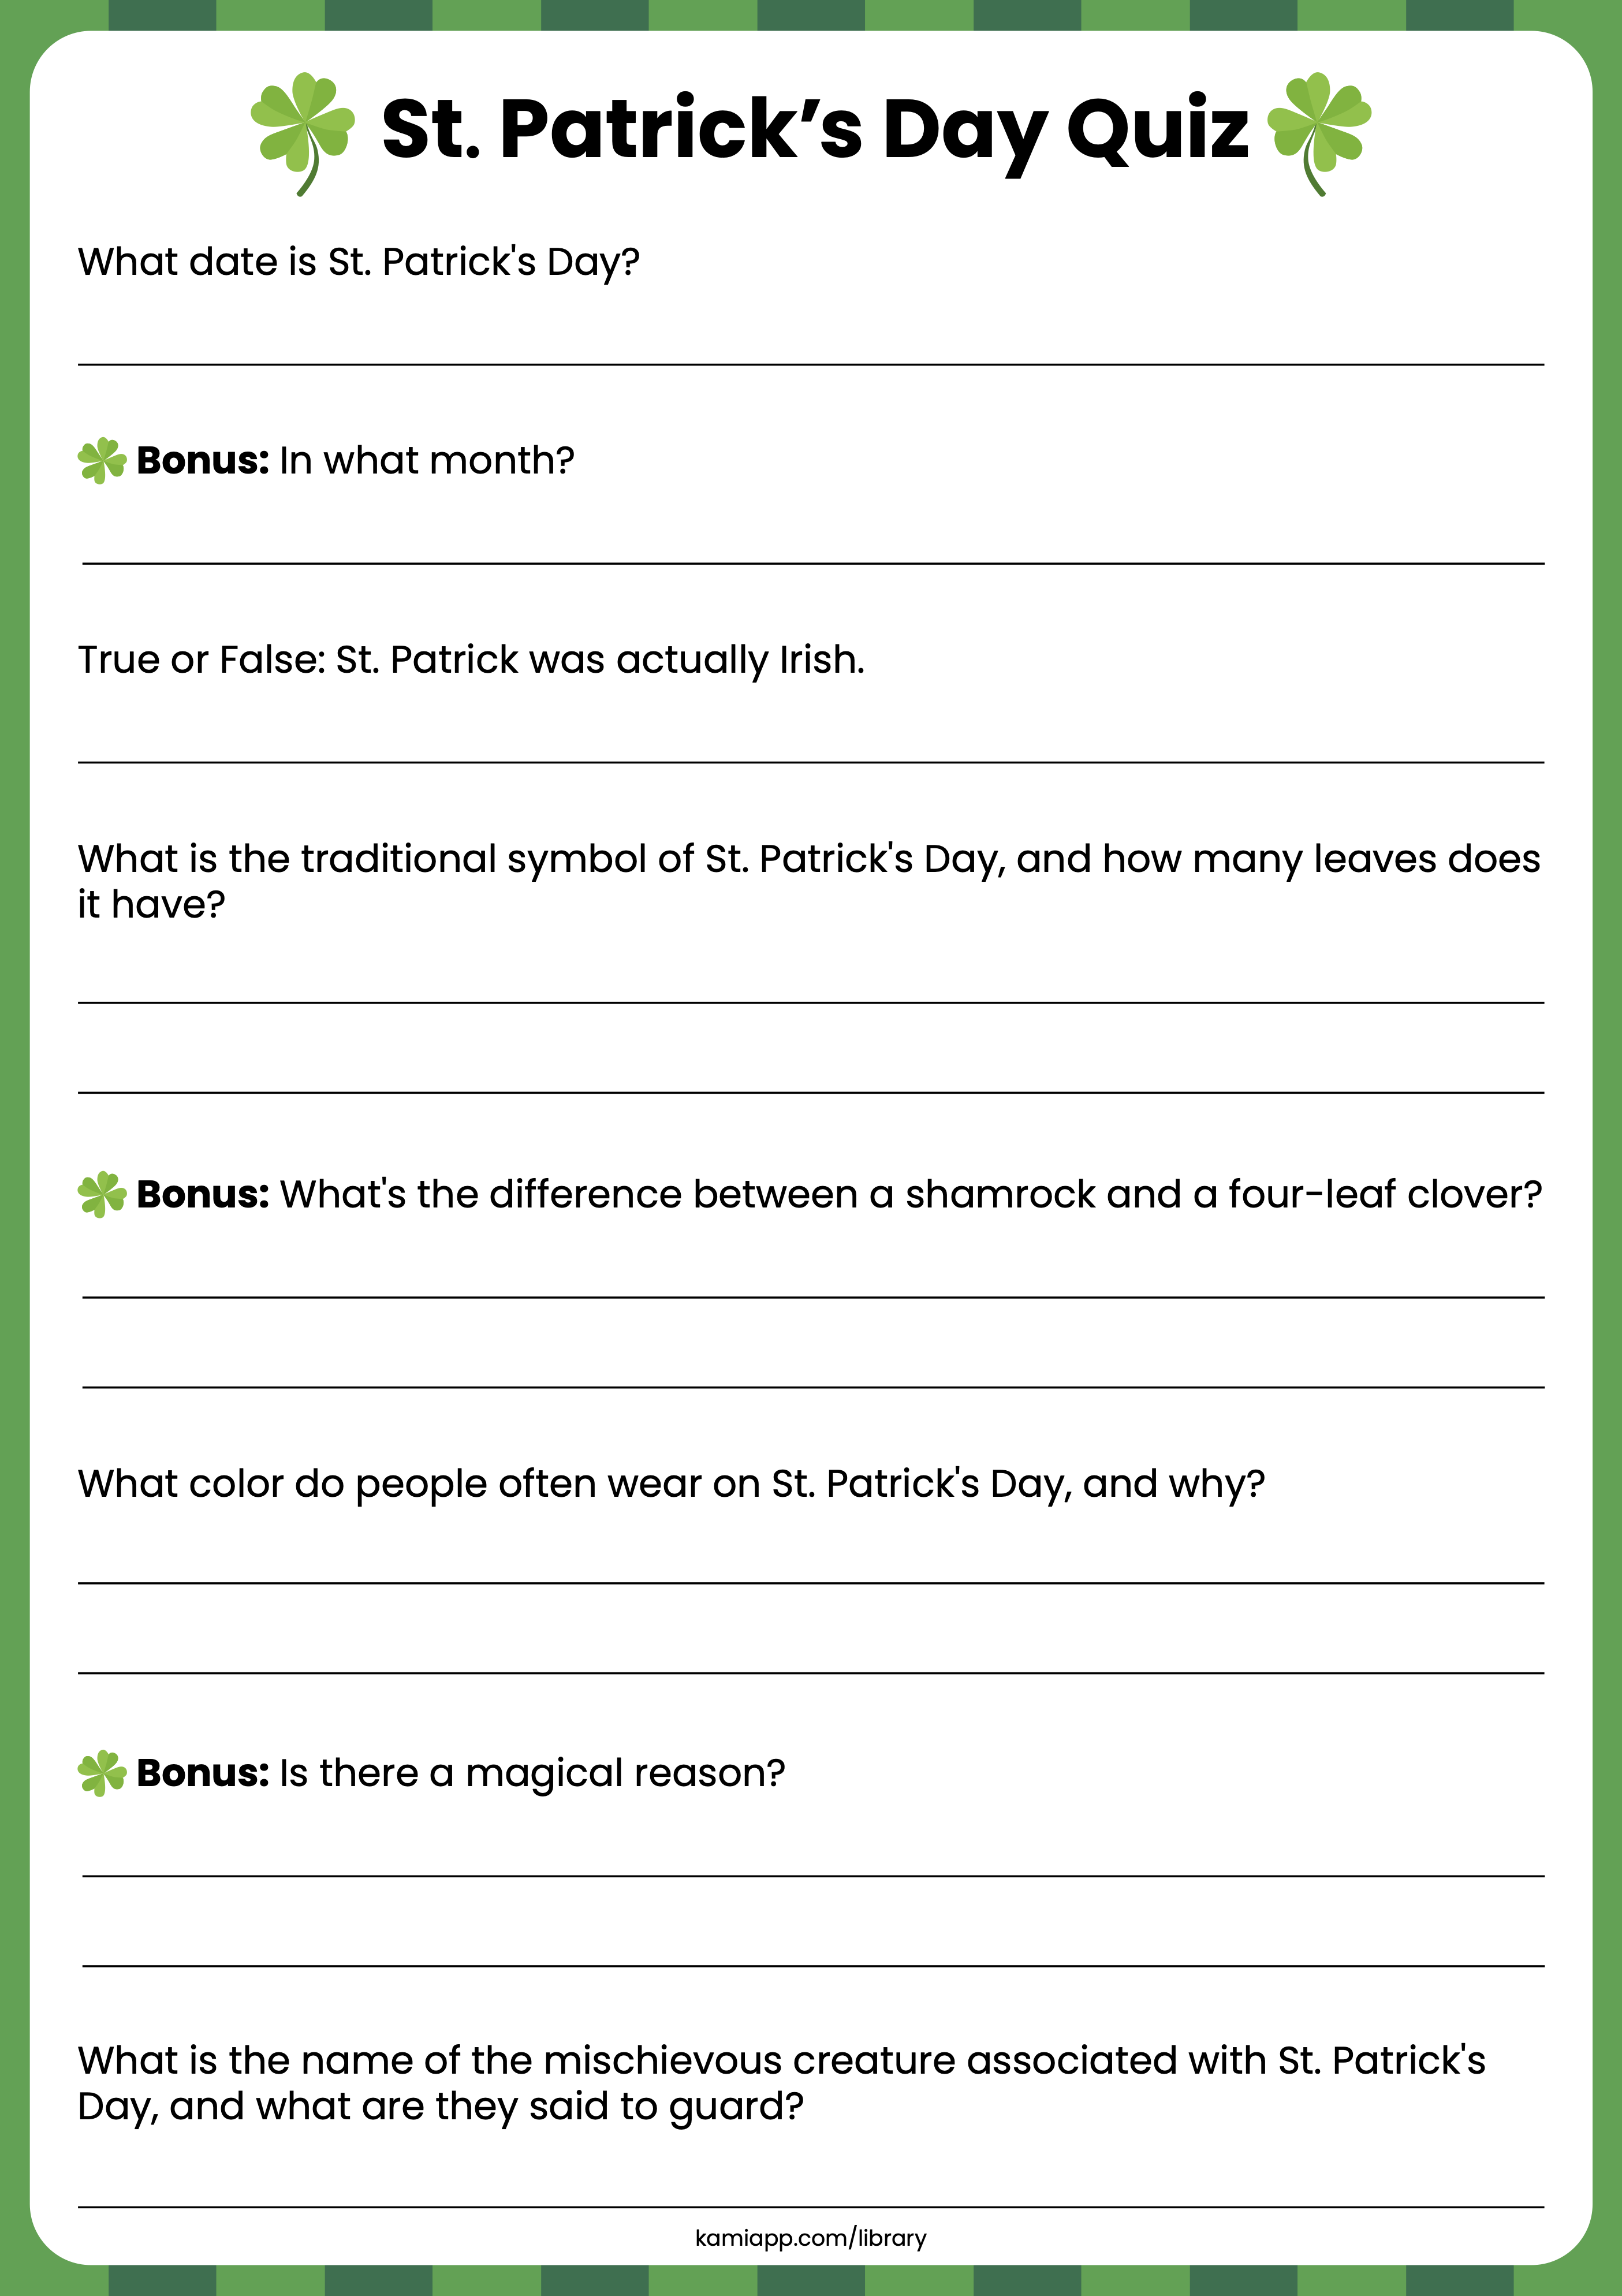 A quiz for St Patrick's Day with a number of questions to answer.